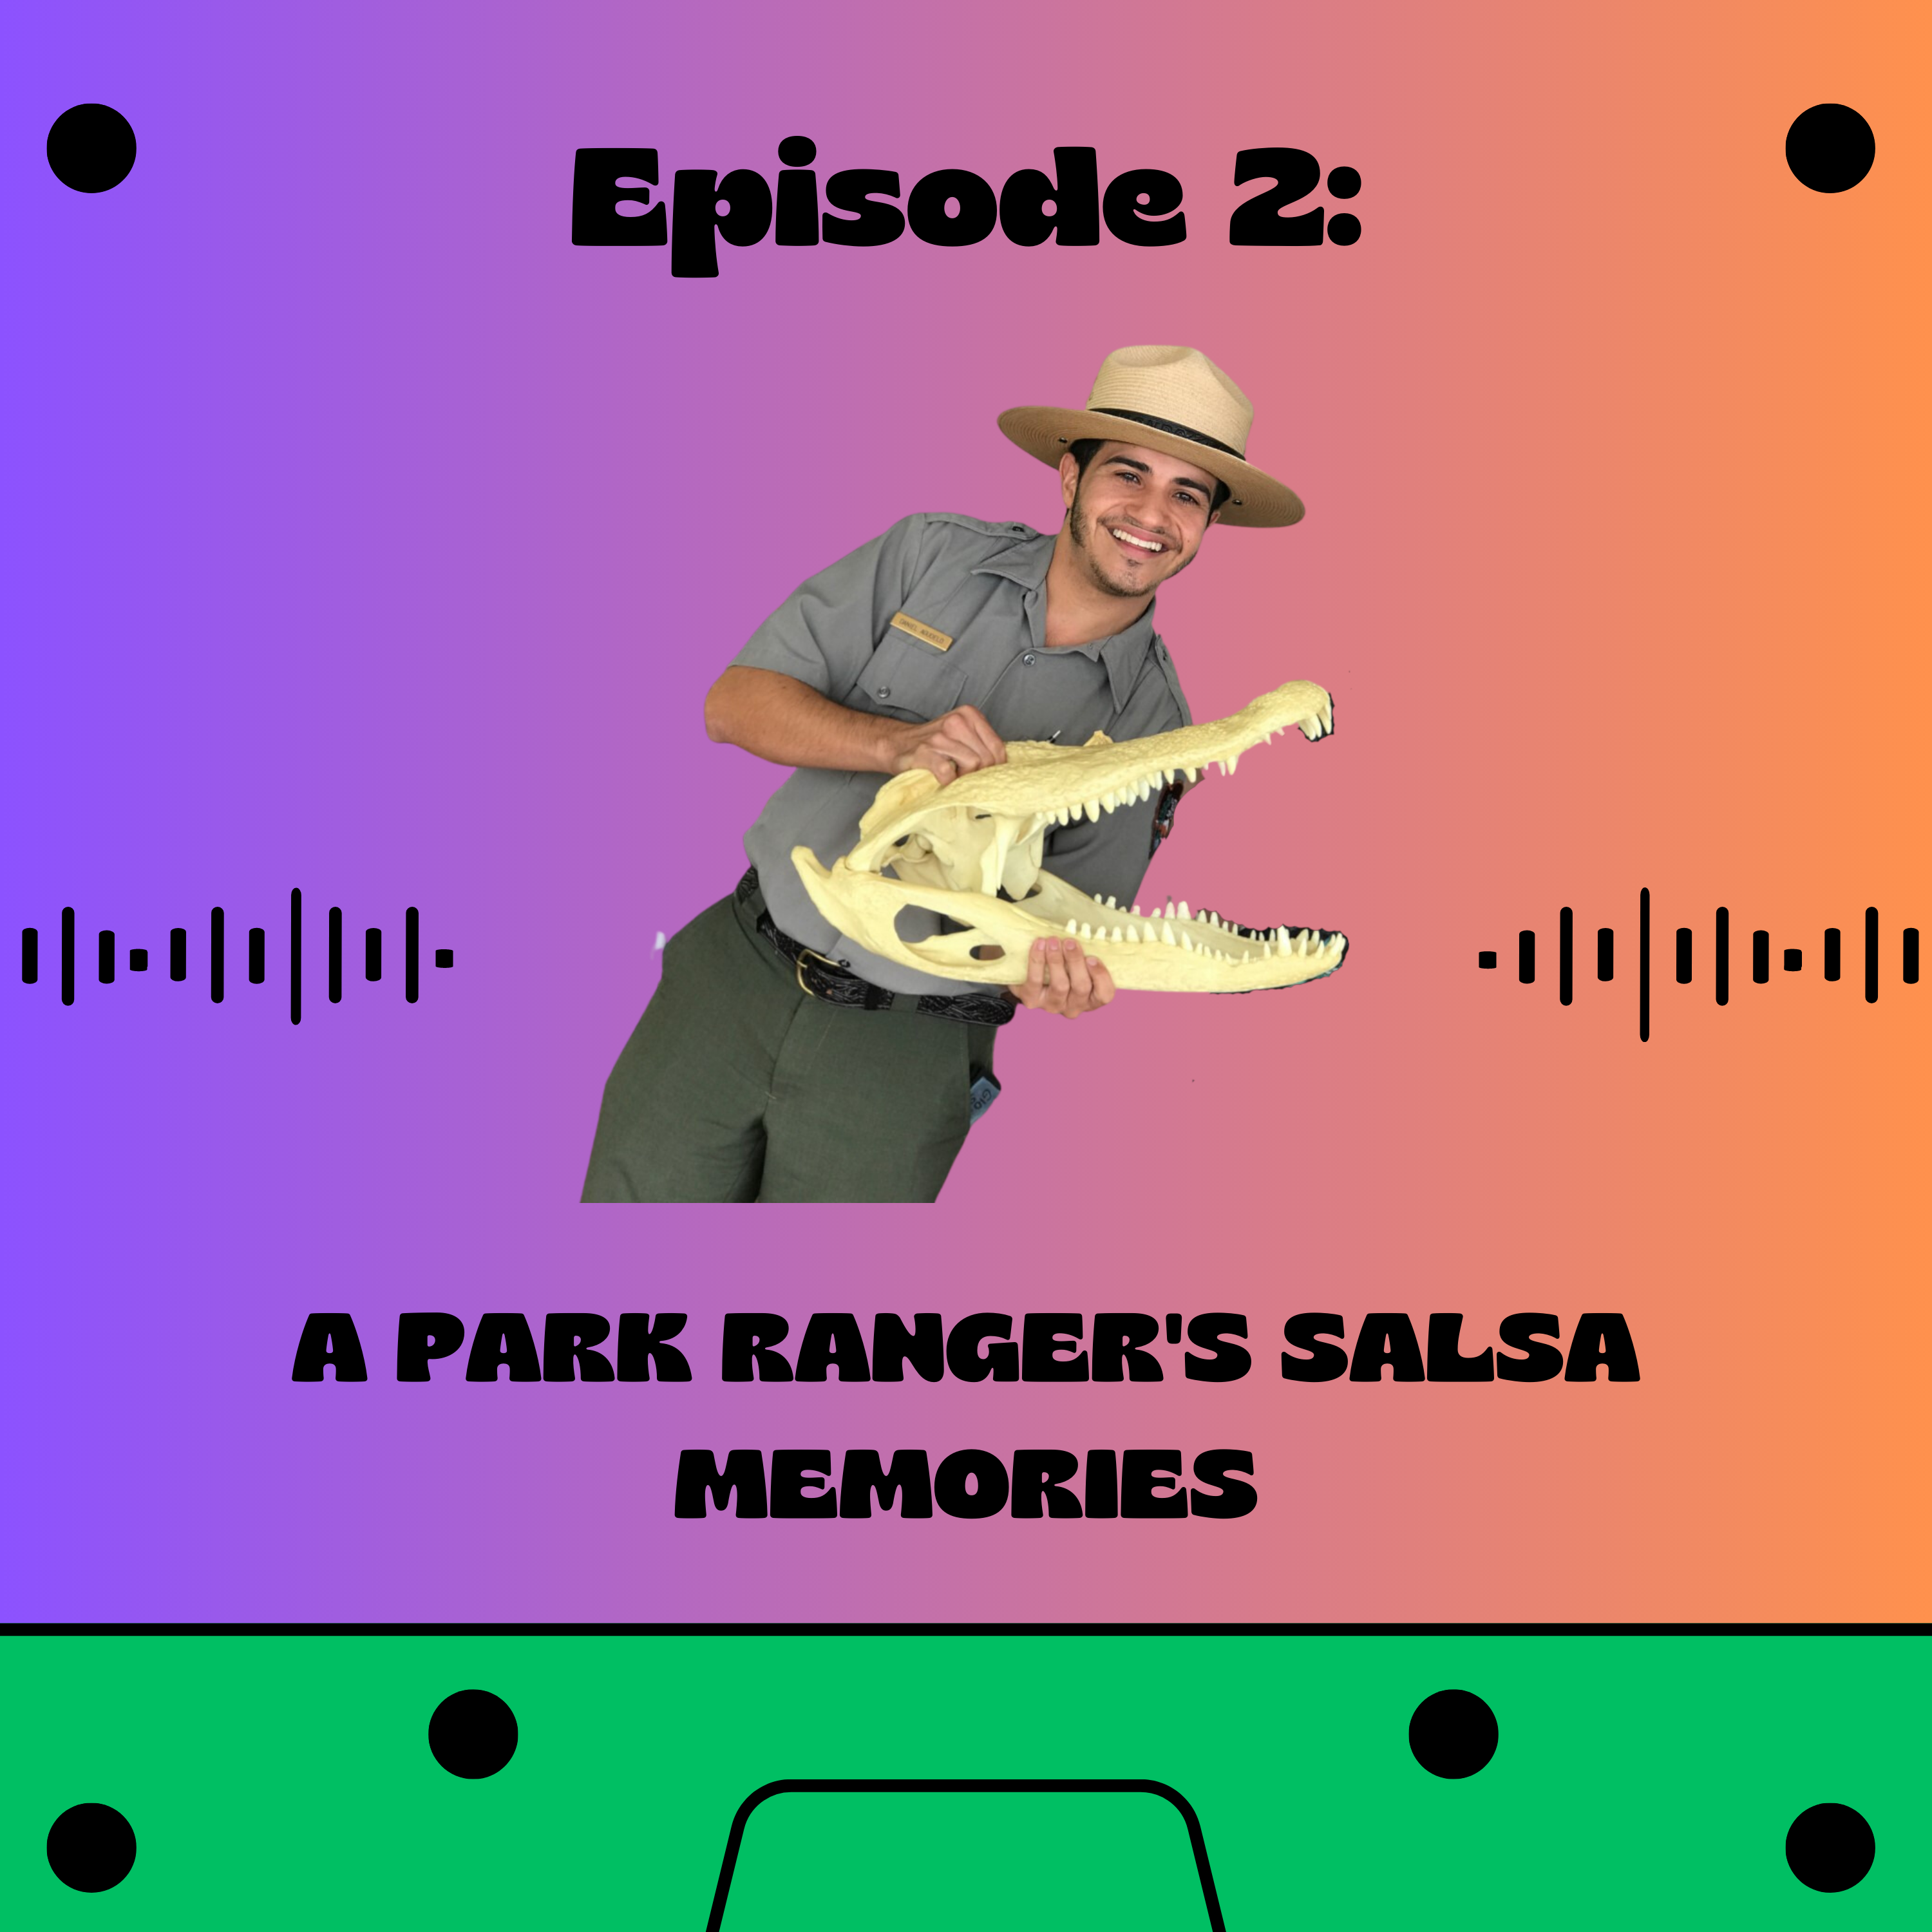 The cover for Episode 2 of the Oíste? Podcast series. The text on the photo reads Oíste? Podcast A Park Ranger's Salsa Memories. There is a picture of a park service employee holding a crocodile cranium in the middle.